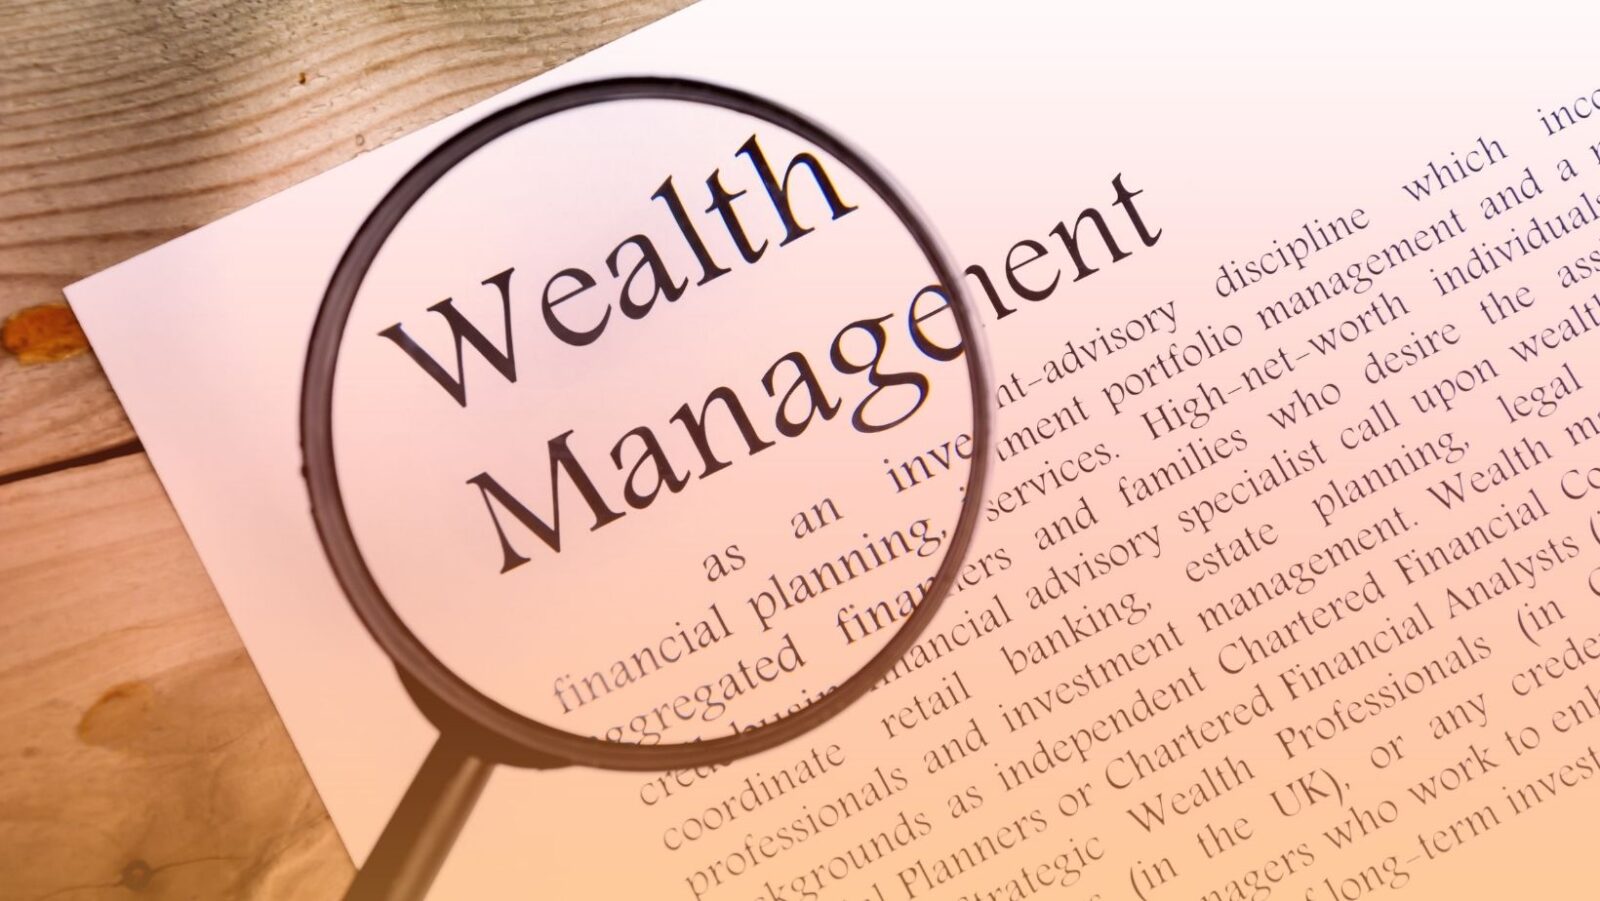 Why Wealth Management Is Important